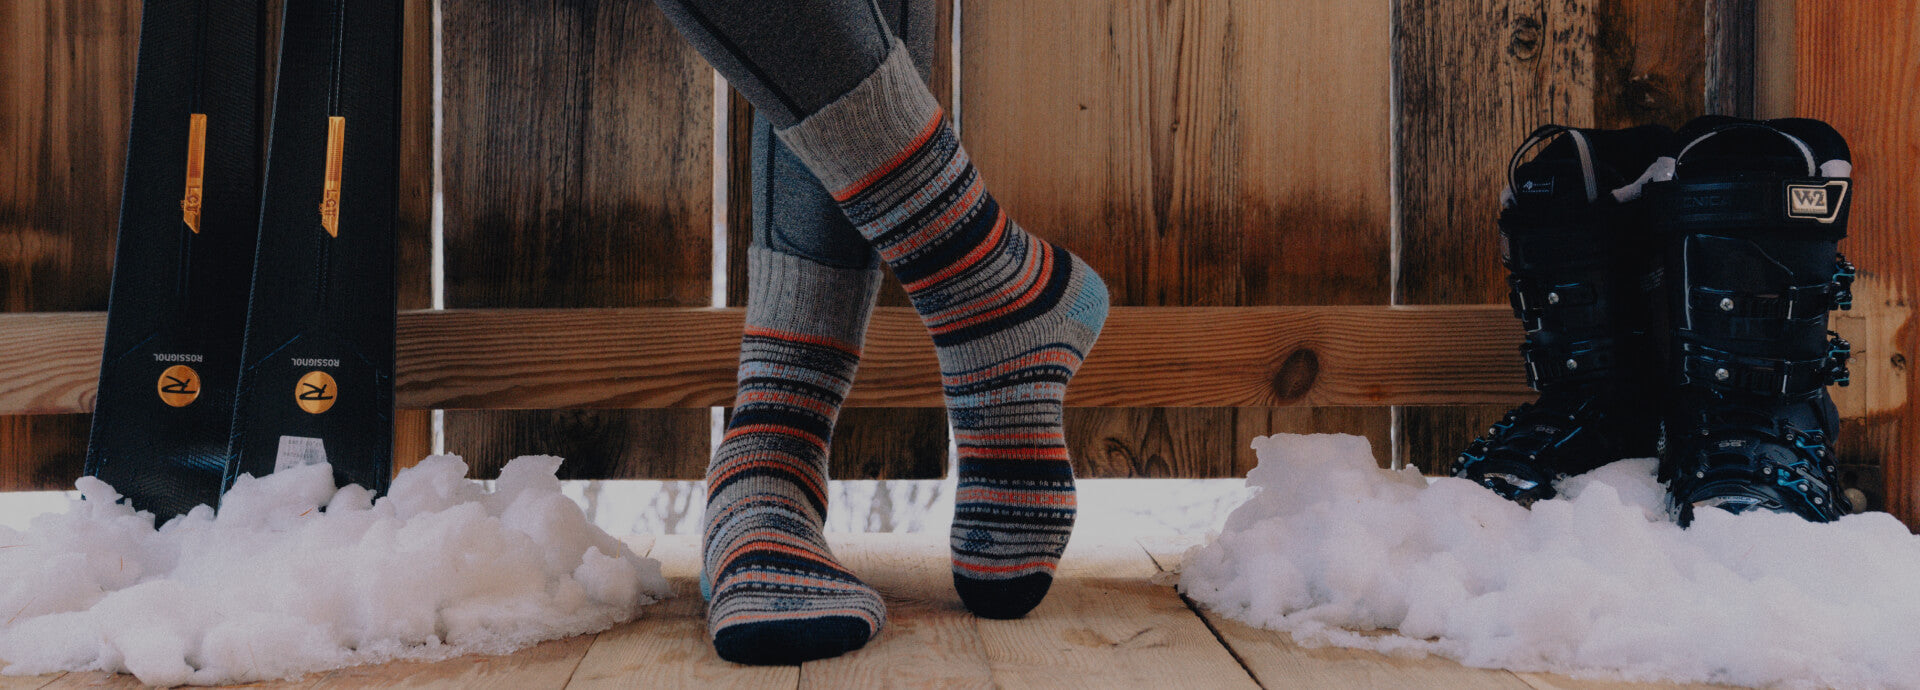 How to choose warm socks when shopping online